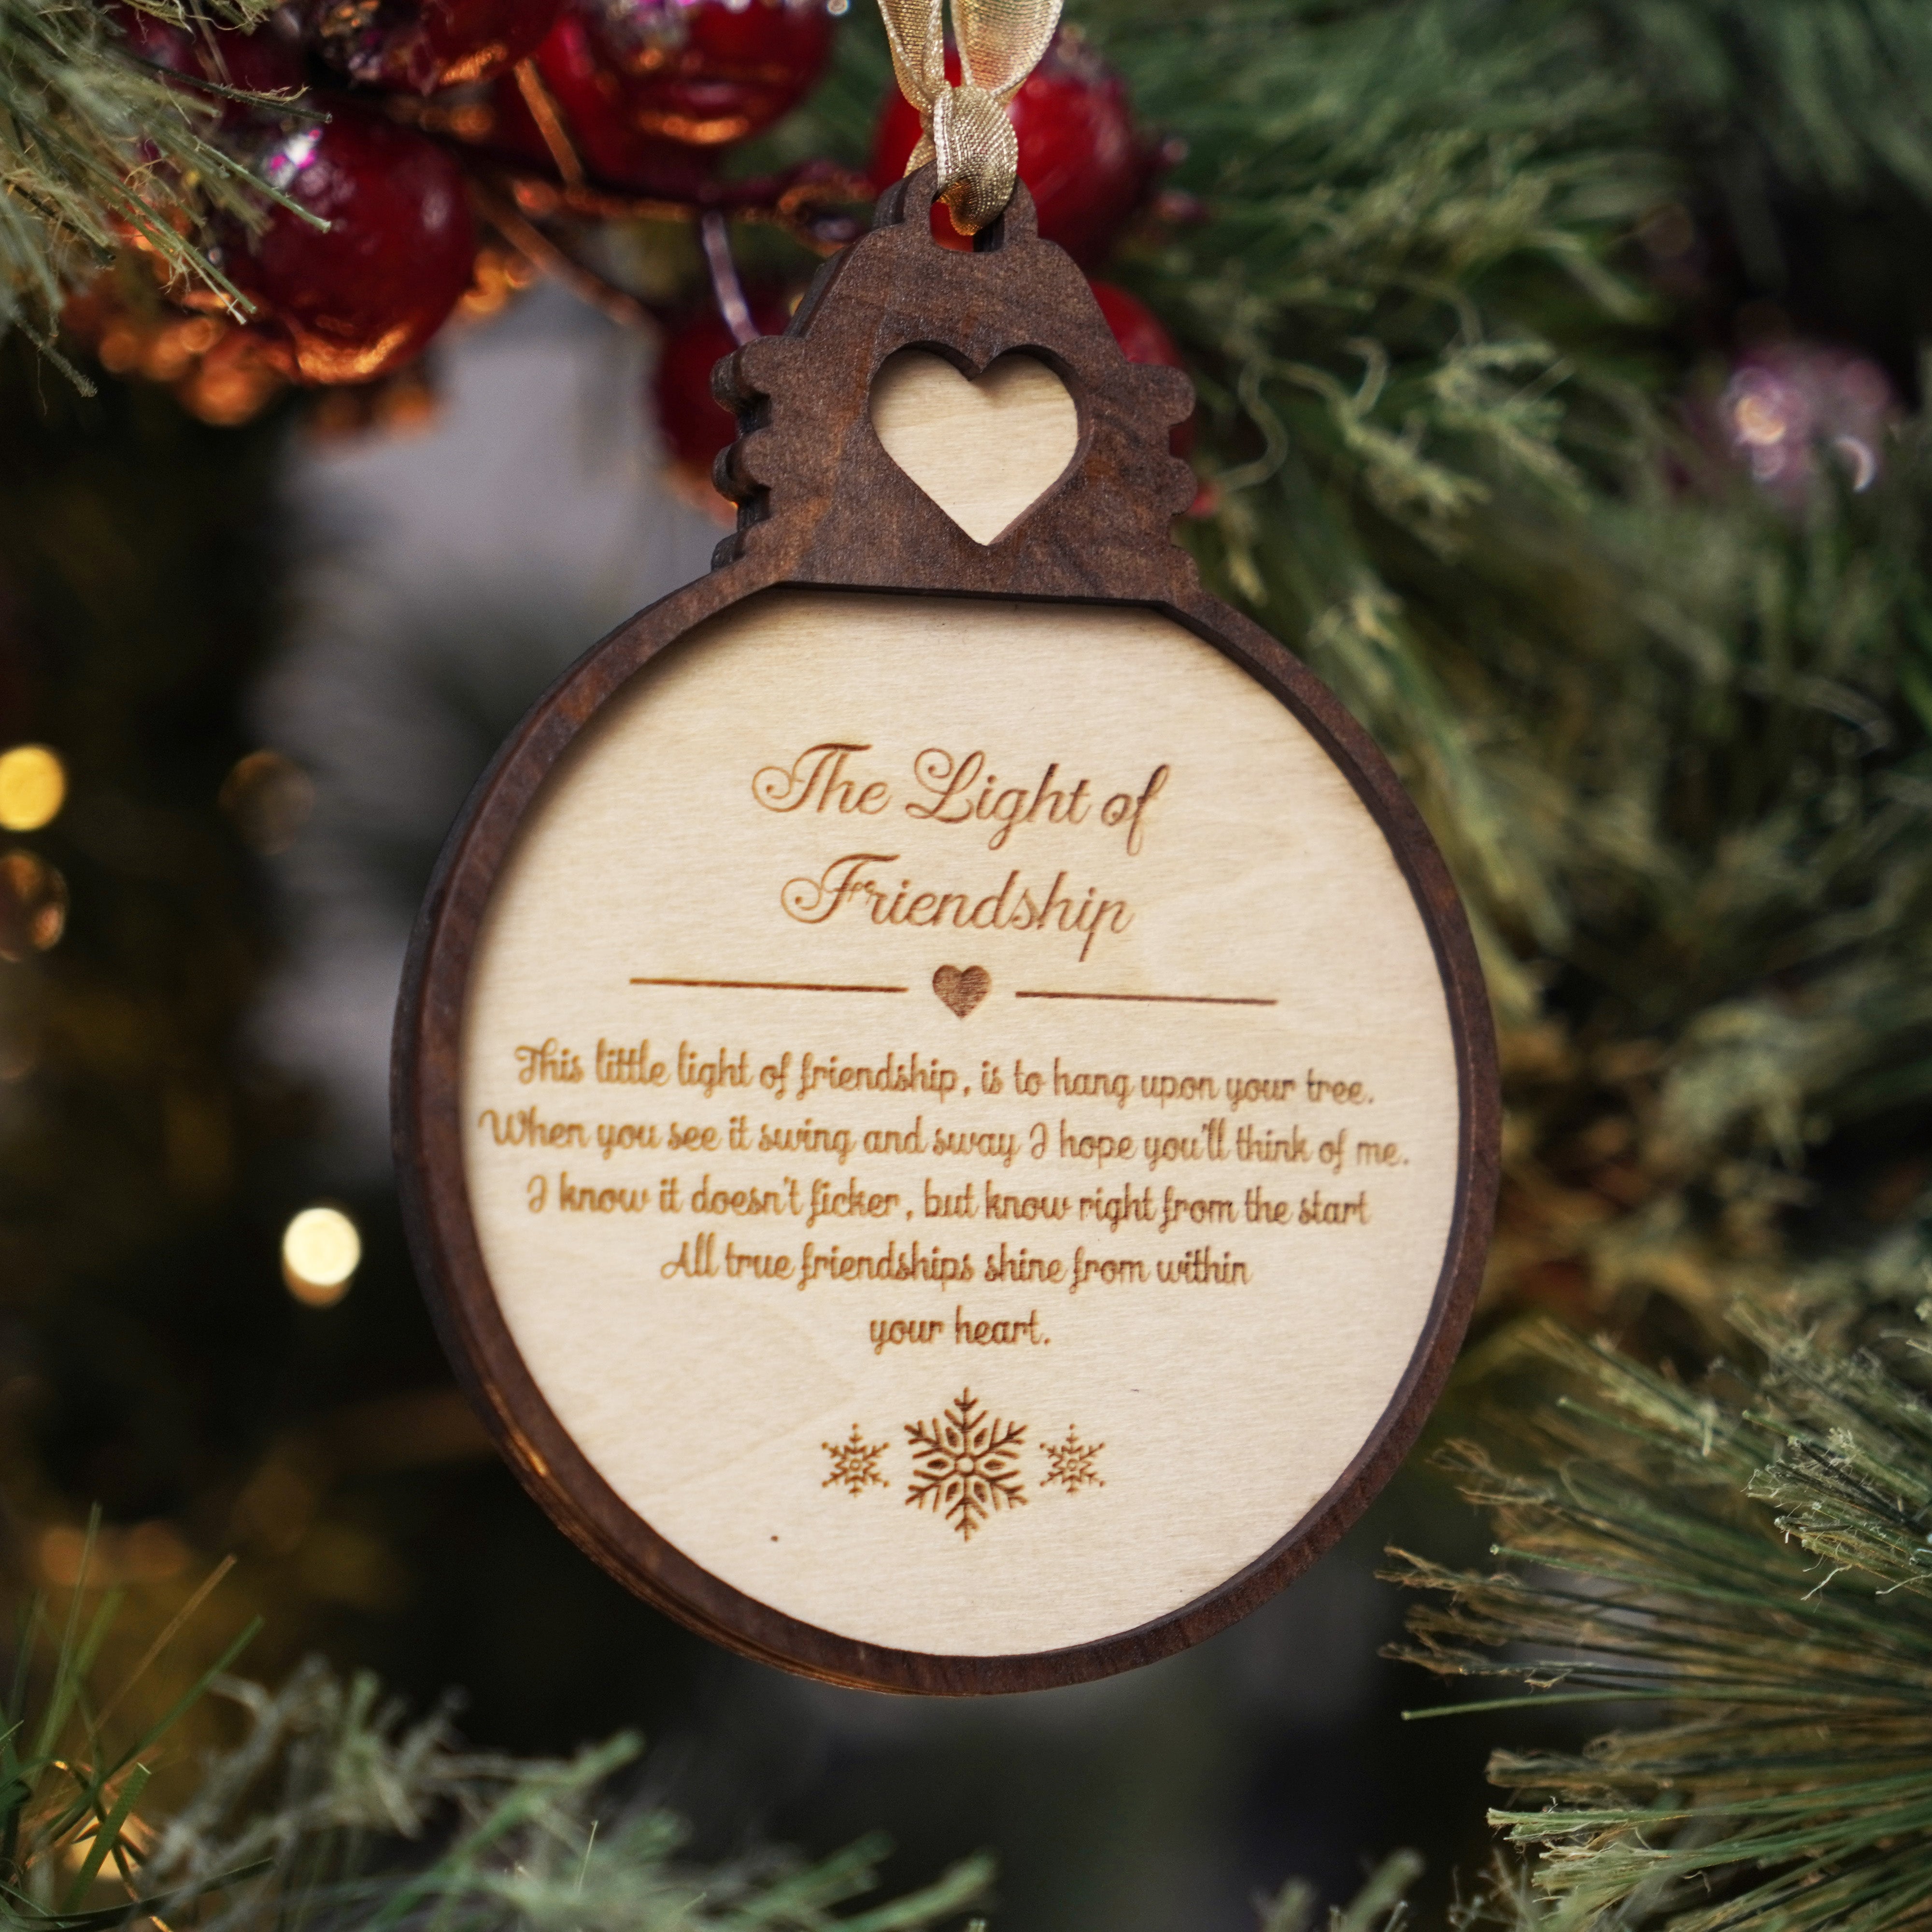 The Light of Friendship Great gift for Coworkers, Friends, Neighbors, Family Wood Rustic Style Christmas Ornament